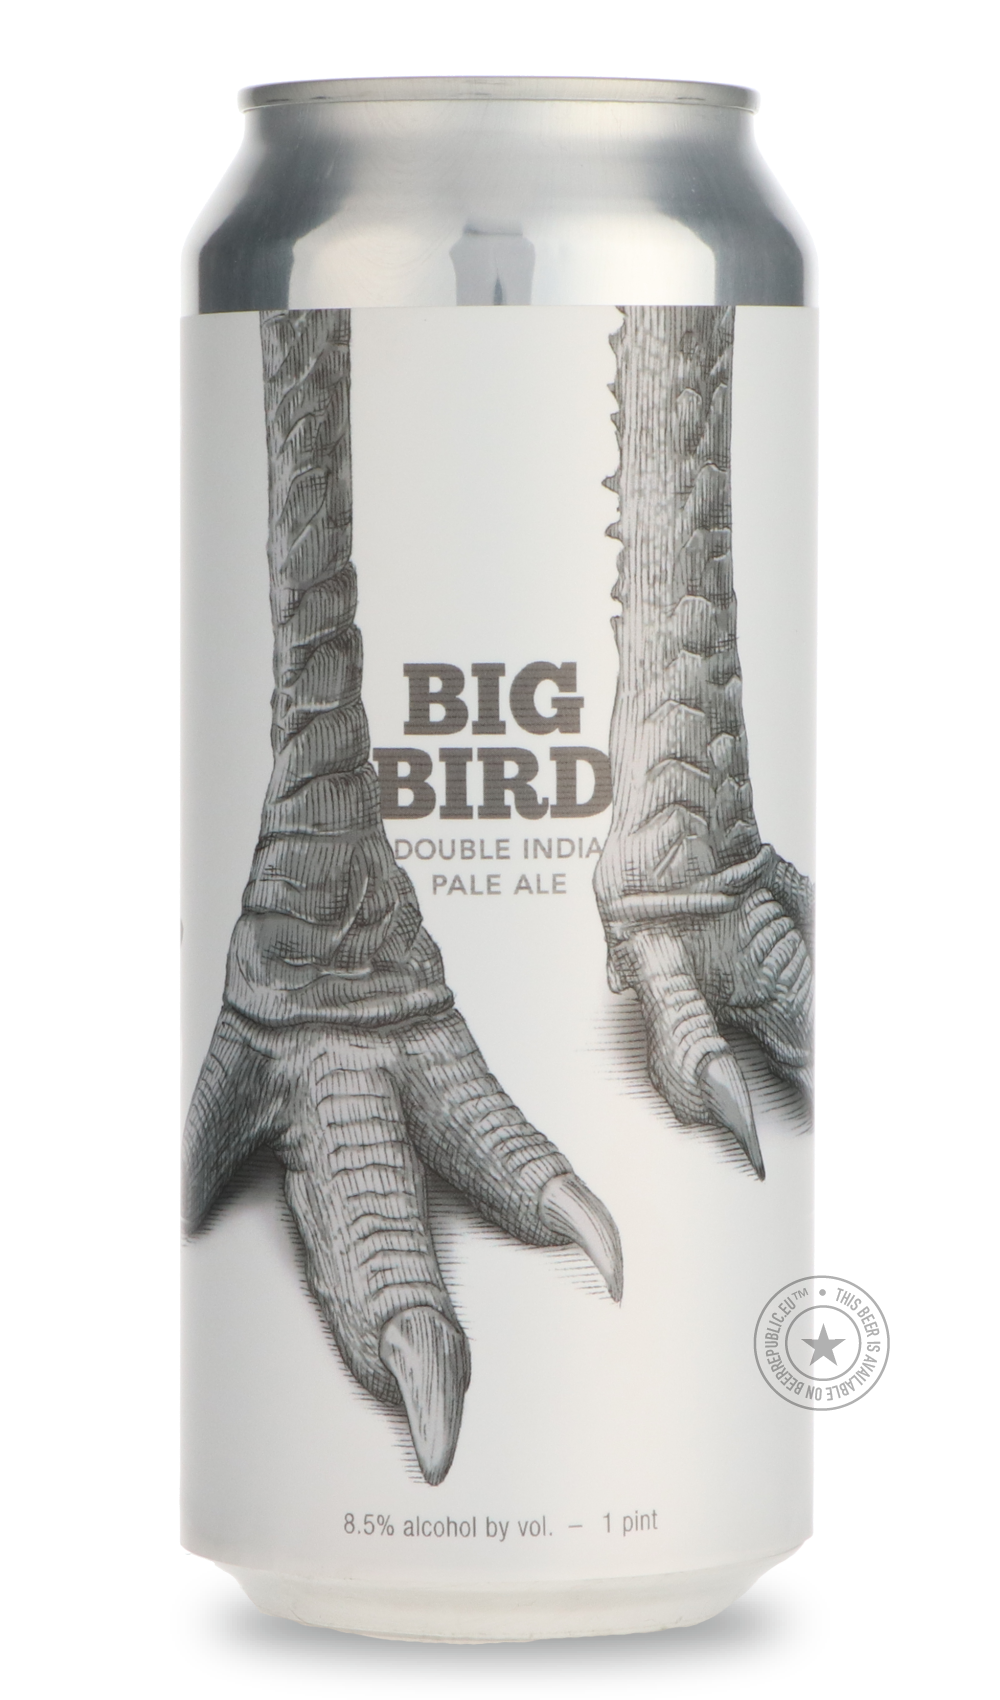 -Trillium- Big Bird-IPA- Only @ Beer Republic - The best online beer store for American & Canadian craft beer - Buy beer online from the USA and Canada - Bier online kopen - Amerikaans bier kopen - Craft beer store - Craft beer kopen - Amerikanisch bier kaufen - Bier online kaufen - Acheter biere online - IPA - Stout - Porter - New England IPA - Hazy IPA - Imperial Stout - Barrel Aged - Barrel Aged Imperial Stout - Brown - Dark beer - Blond - Blonde - Pilsner - Lager - Wheat - Weizen - Amber - Barley Wine -